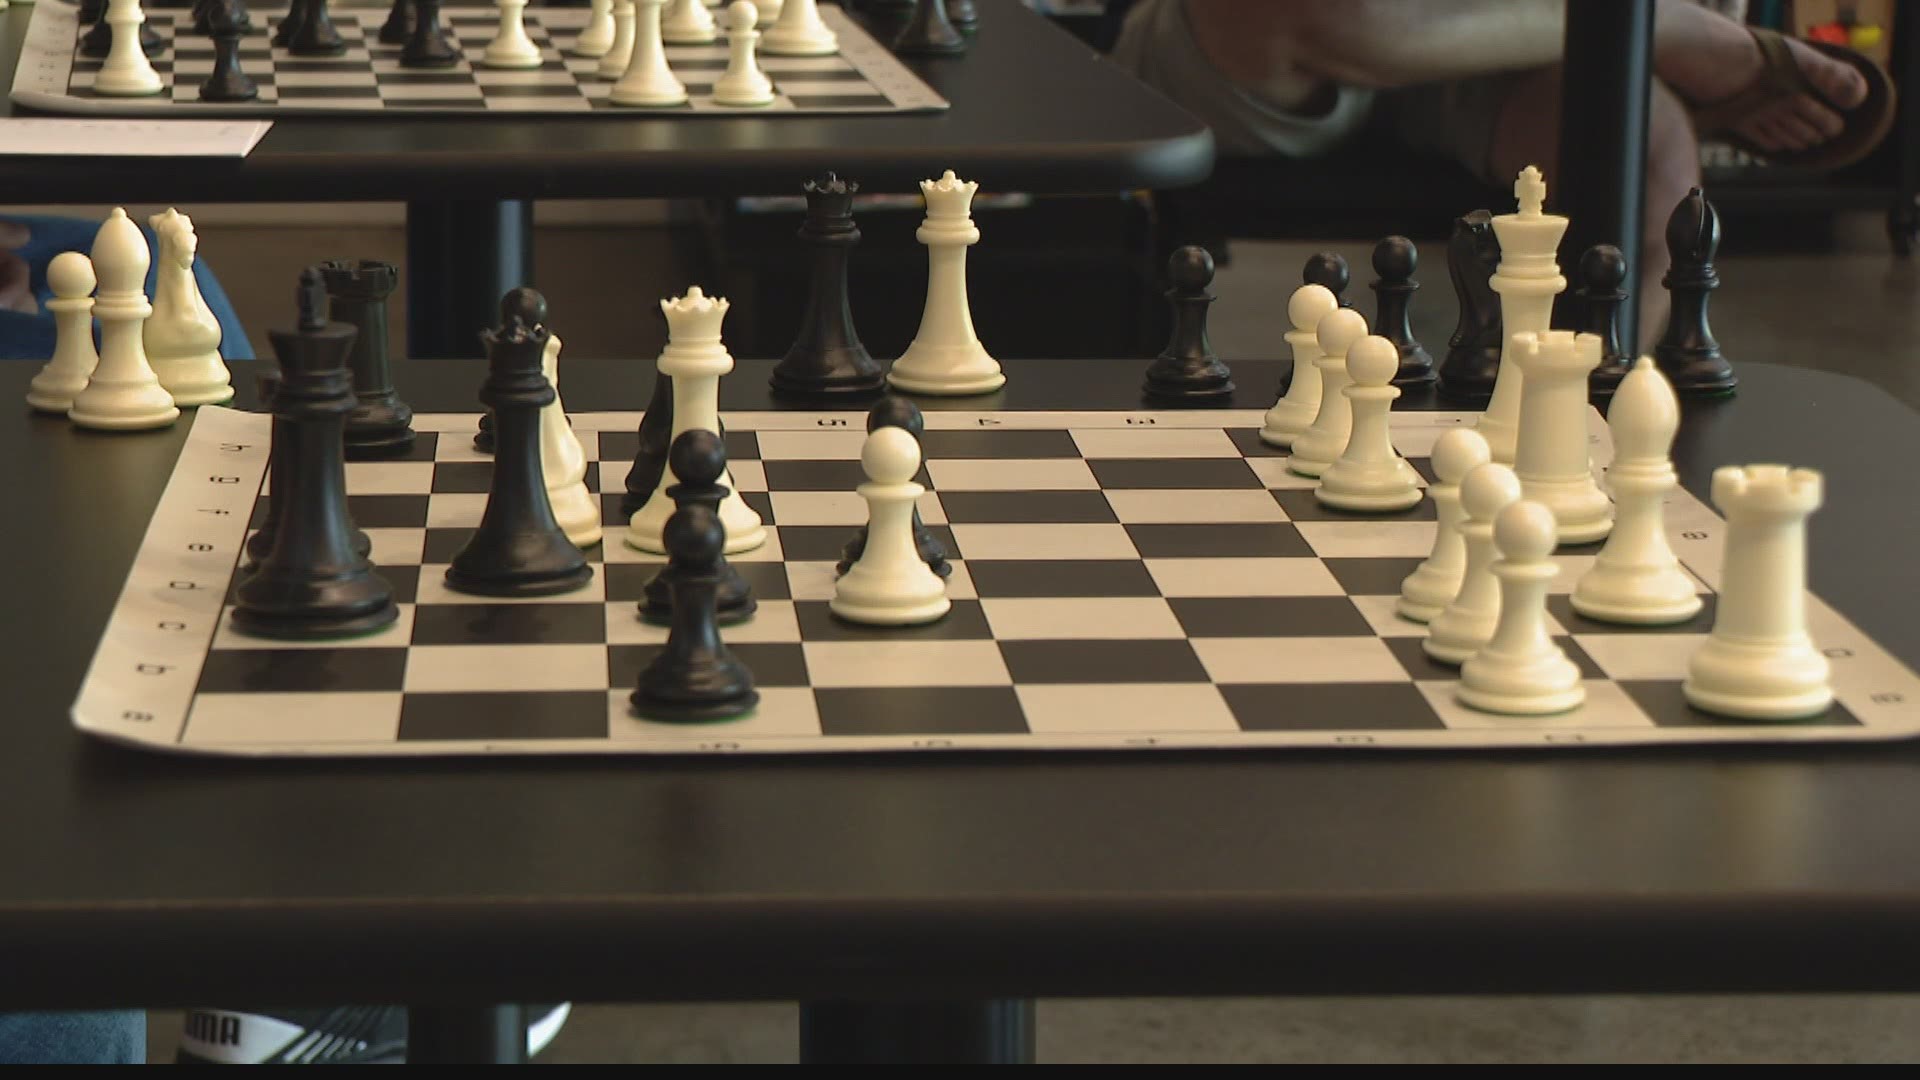 Top chess player in the world visits Indianapolis